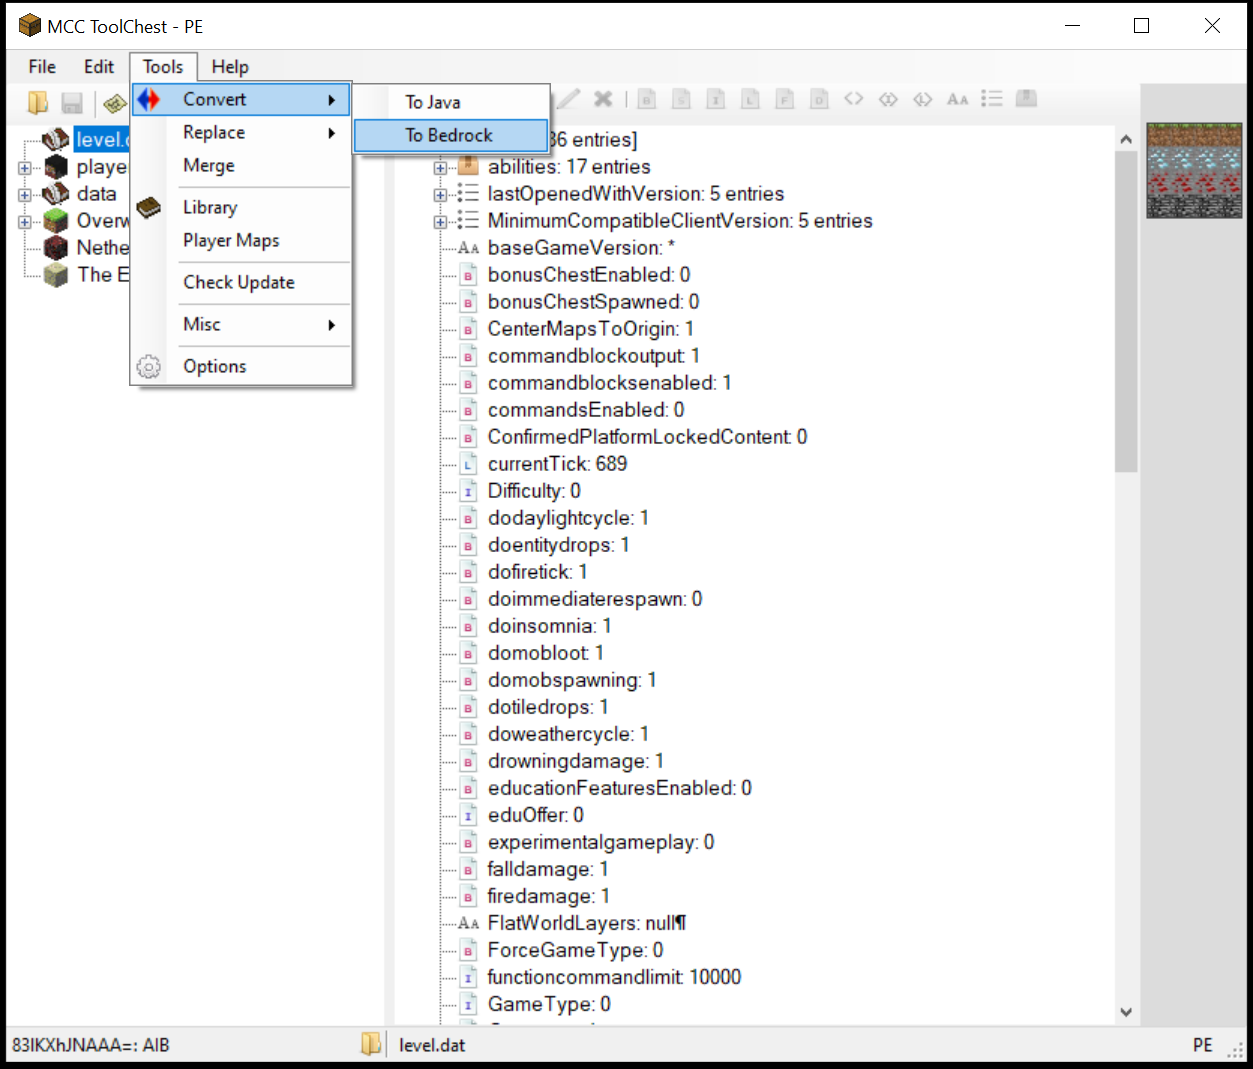 Click on the Tools dropdown to start the MCC conversion process from Java to Bedrock